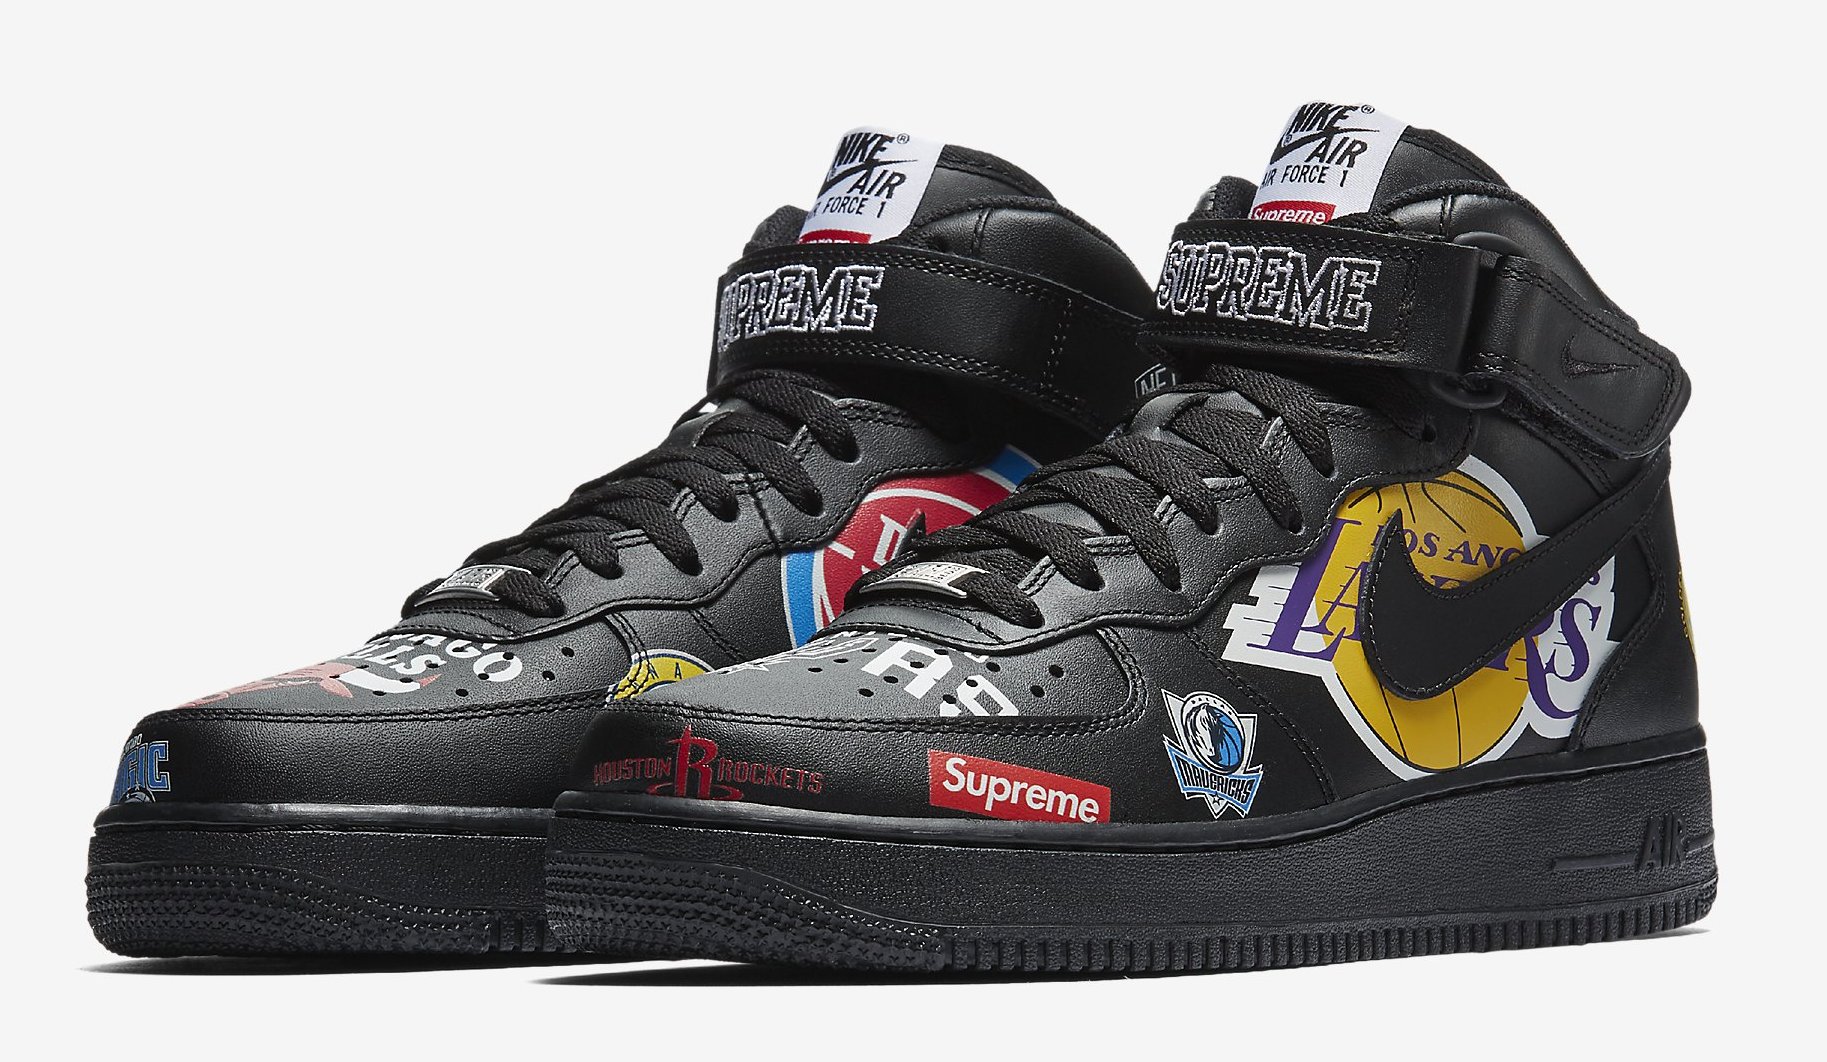 Supreme x Nike Air Force 1 Mids Are Coming Soon